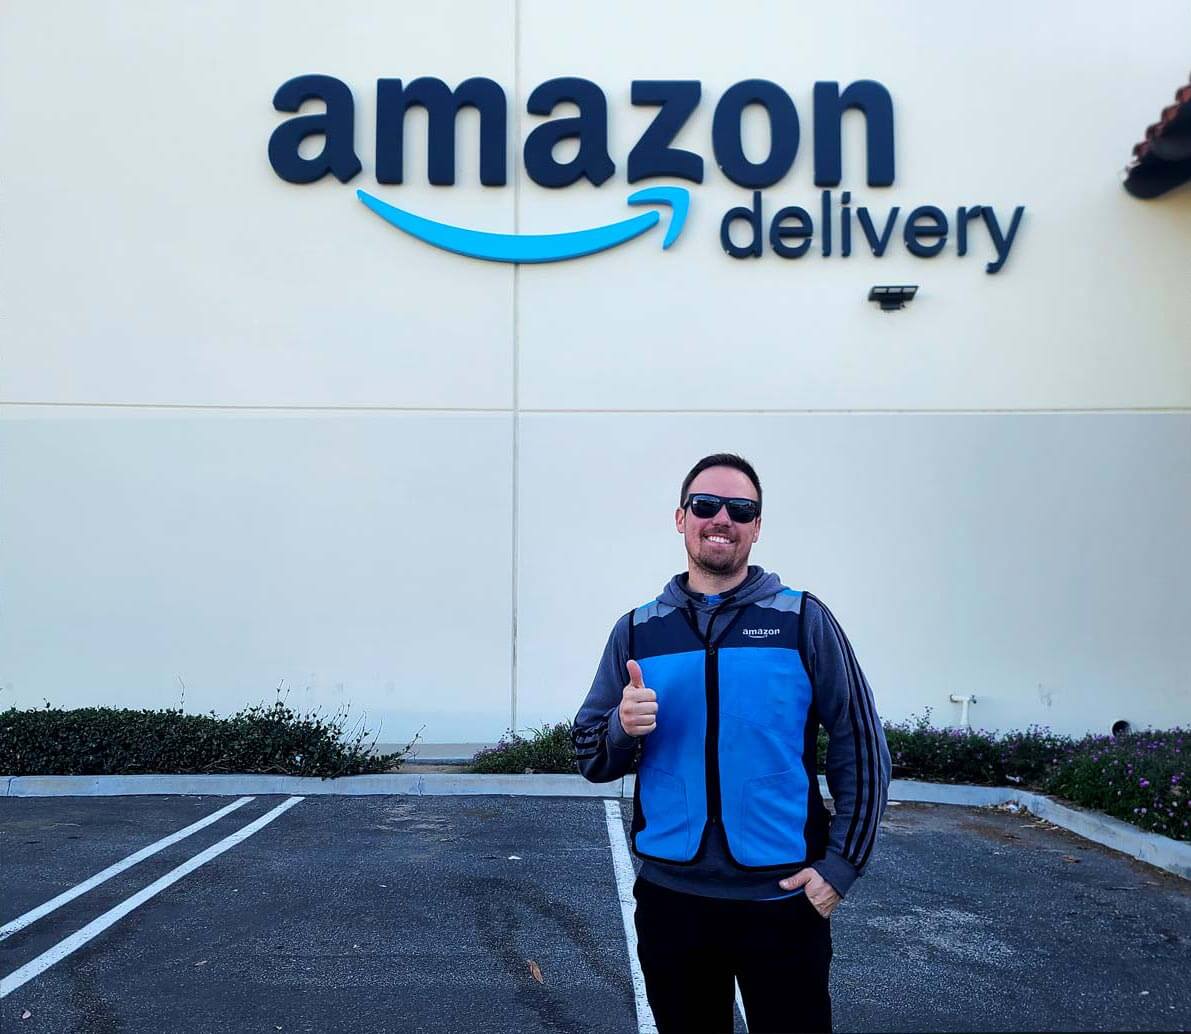 Workamper in Amazon uniform in front of Amazon Delivery warehouse.